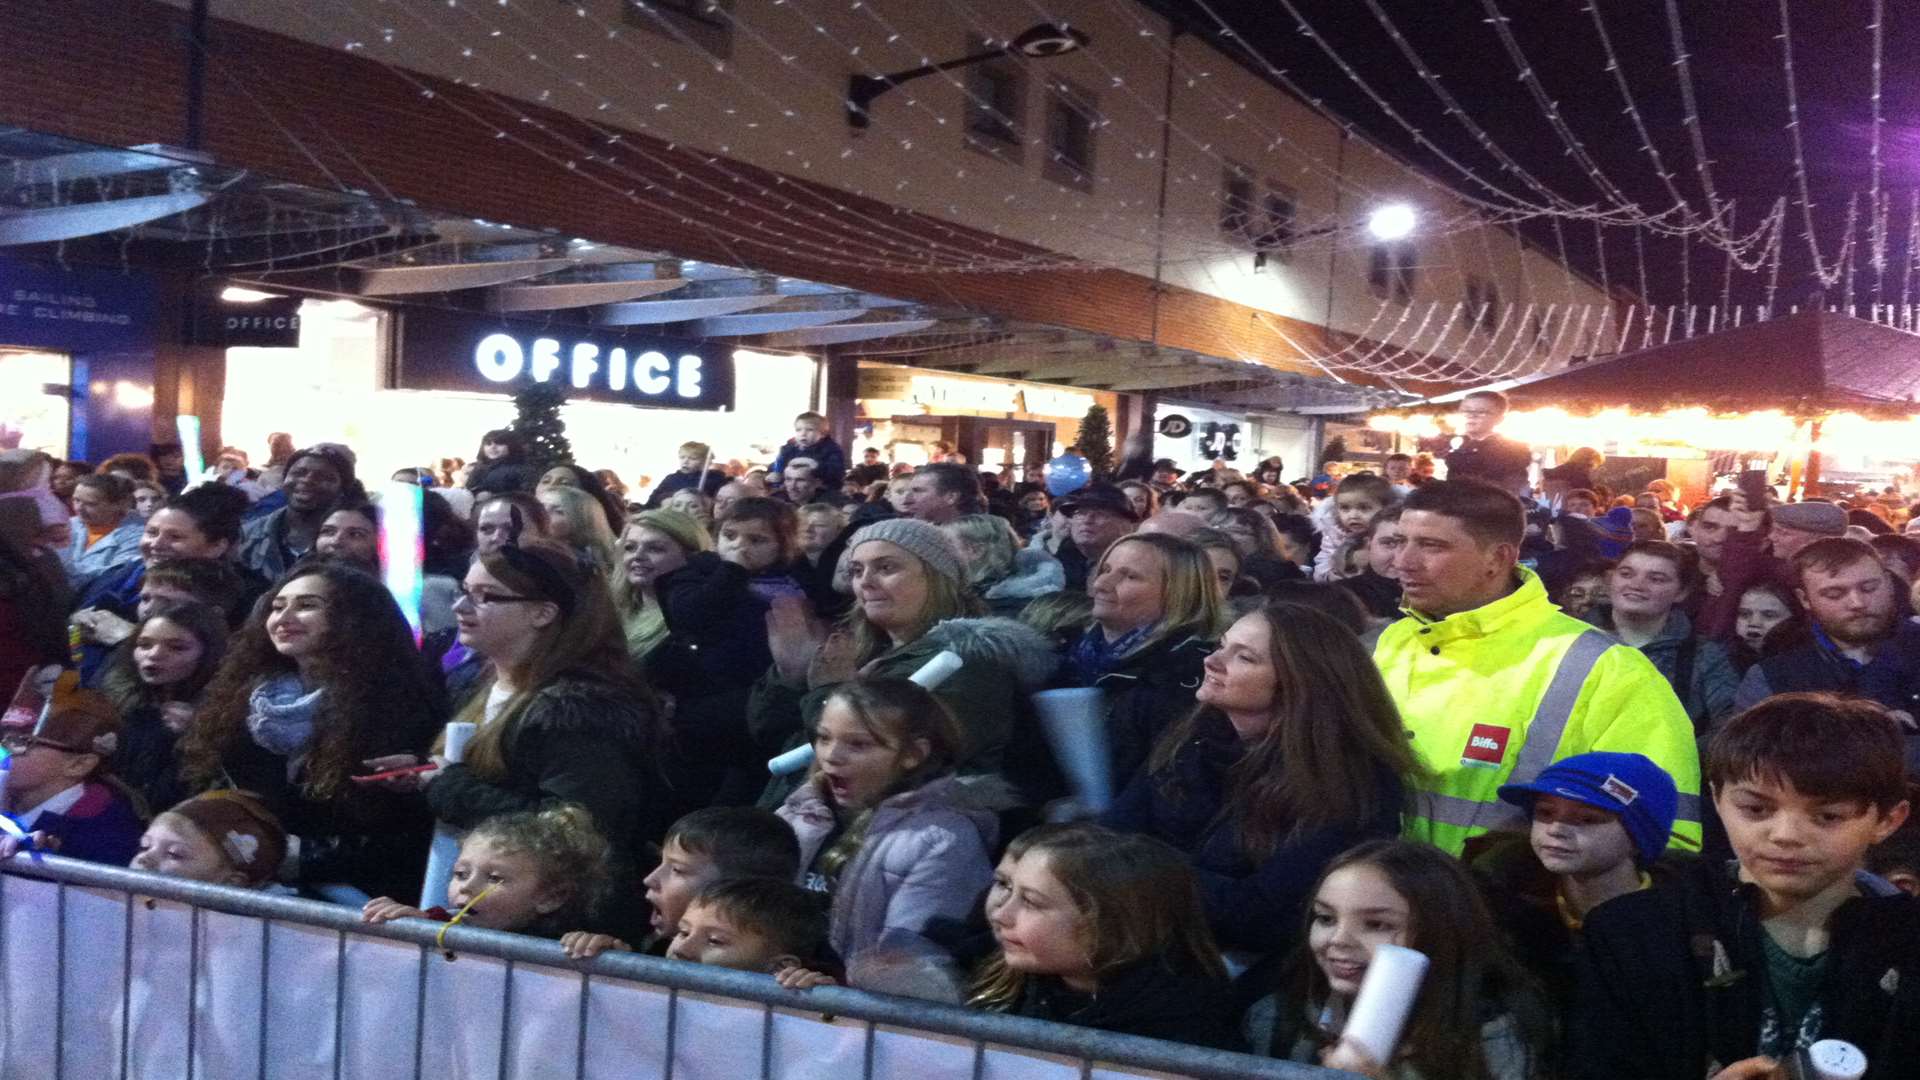 Crowds at Fremlin Walk for the annual Christmas lights switch-on